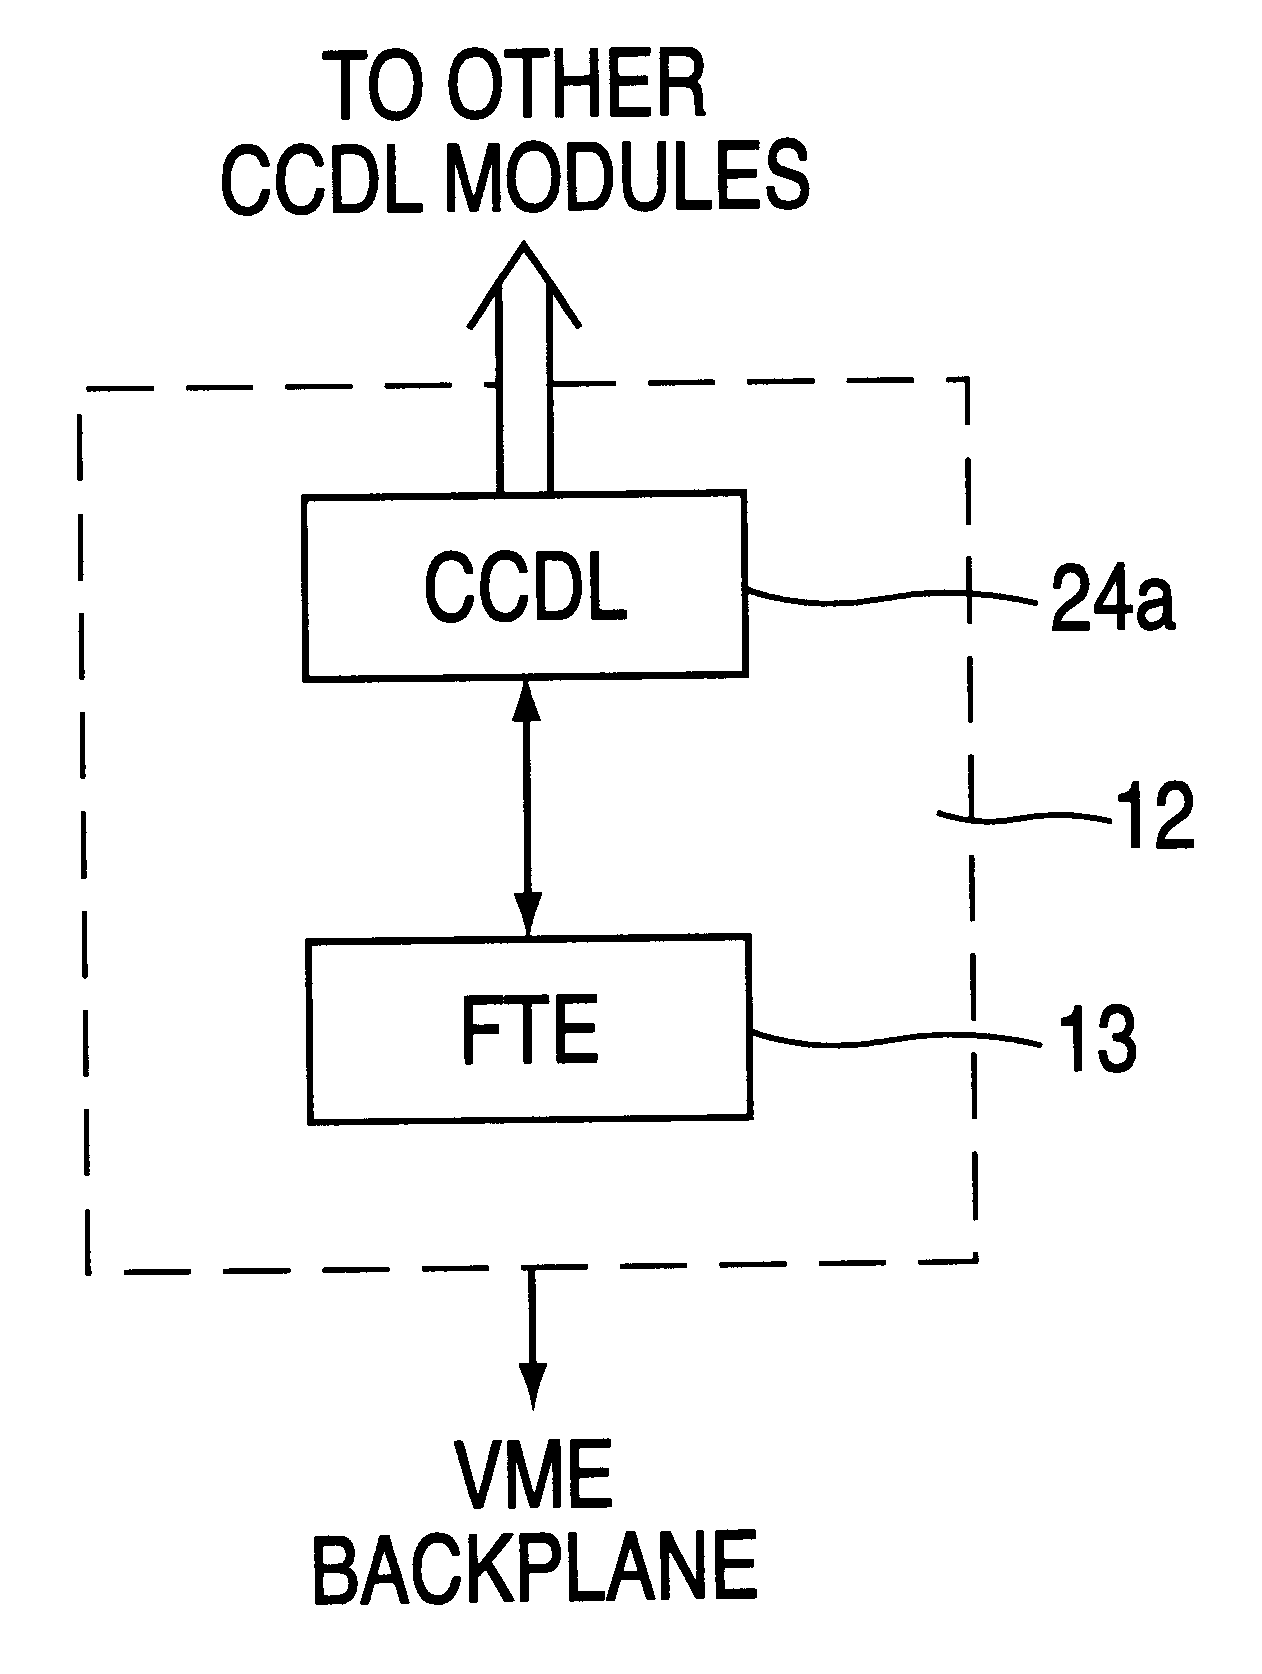 Method and apparatus for managing redundant computer-based systems for fault tolerant computing